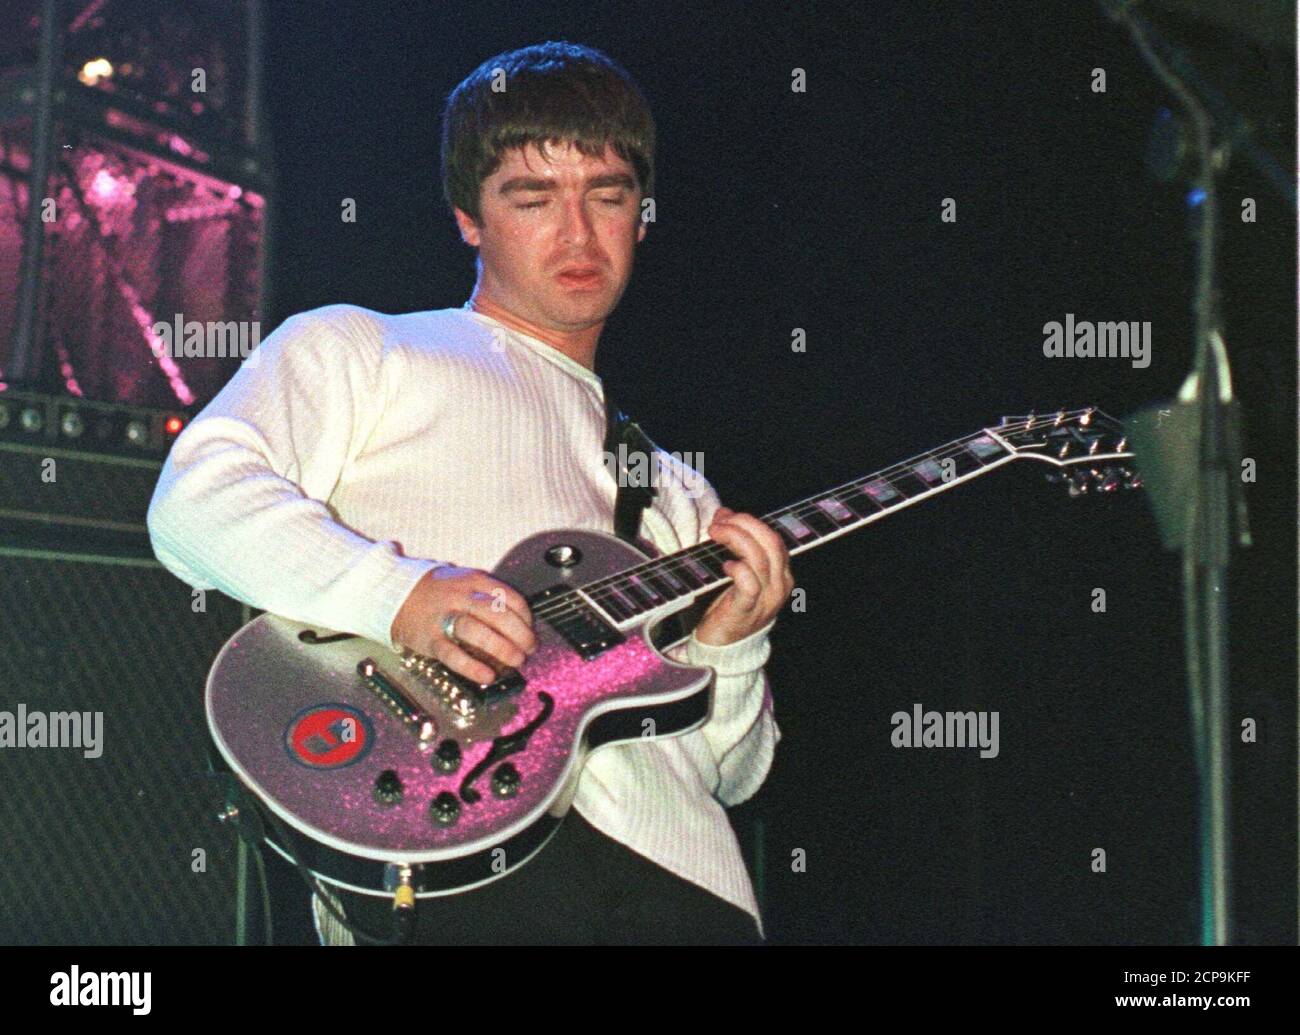 Noel Gallagher plays guitar during one of the opening songs on the first  night of the Oasis "Be Here Now Live 97" tour of Britain September 13.  Oasis's new record "Be here